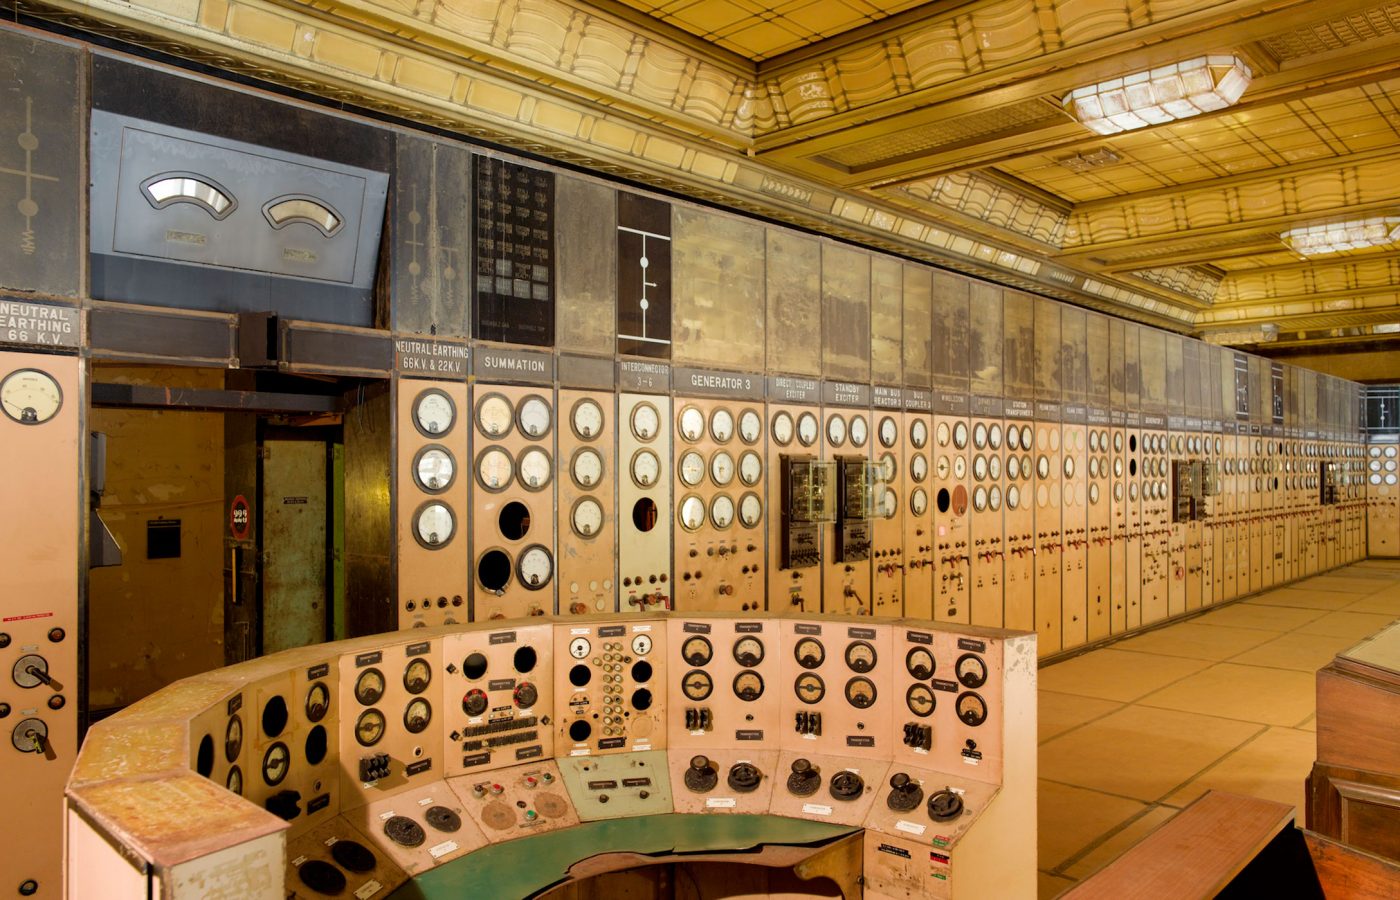 Battersea Power Station Control Room A side